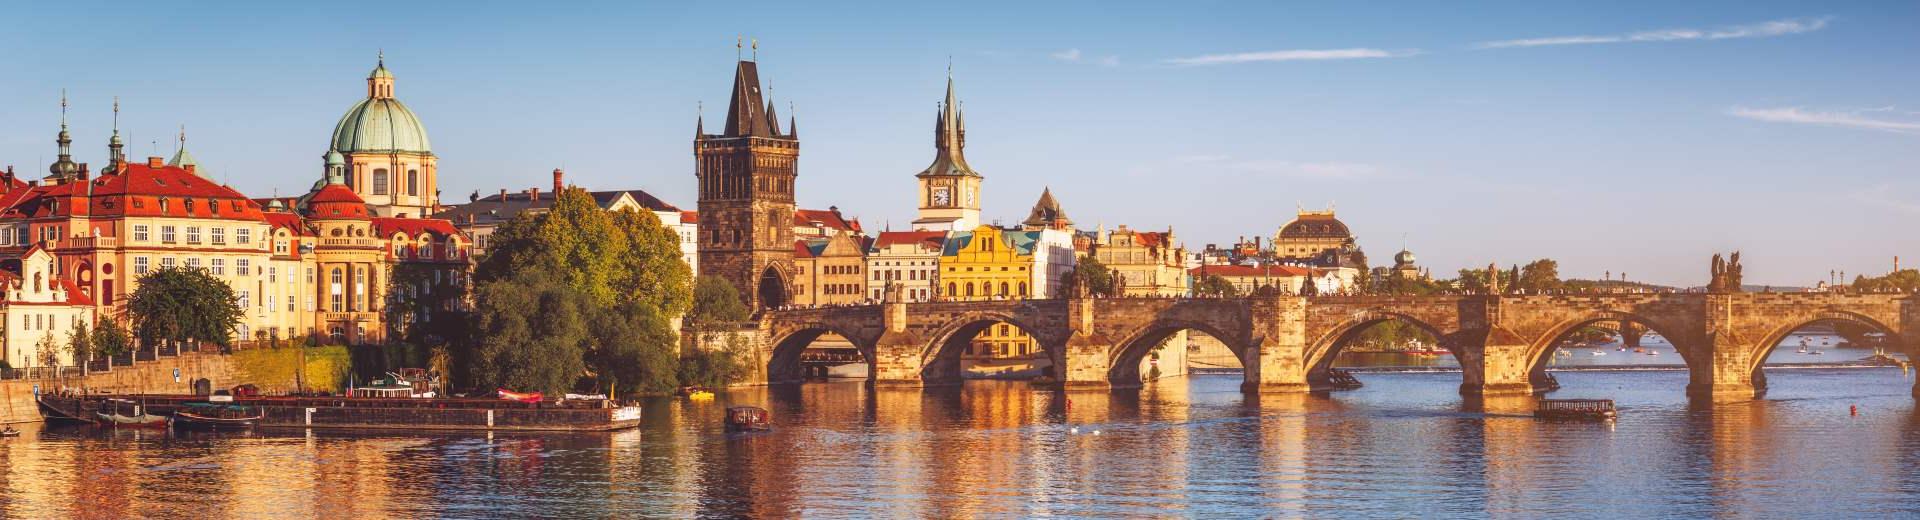 Find a holiday apartment for your trip to picturesque Prague - Casamundo